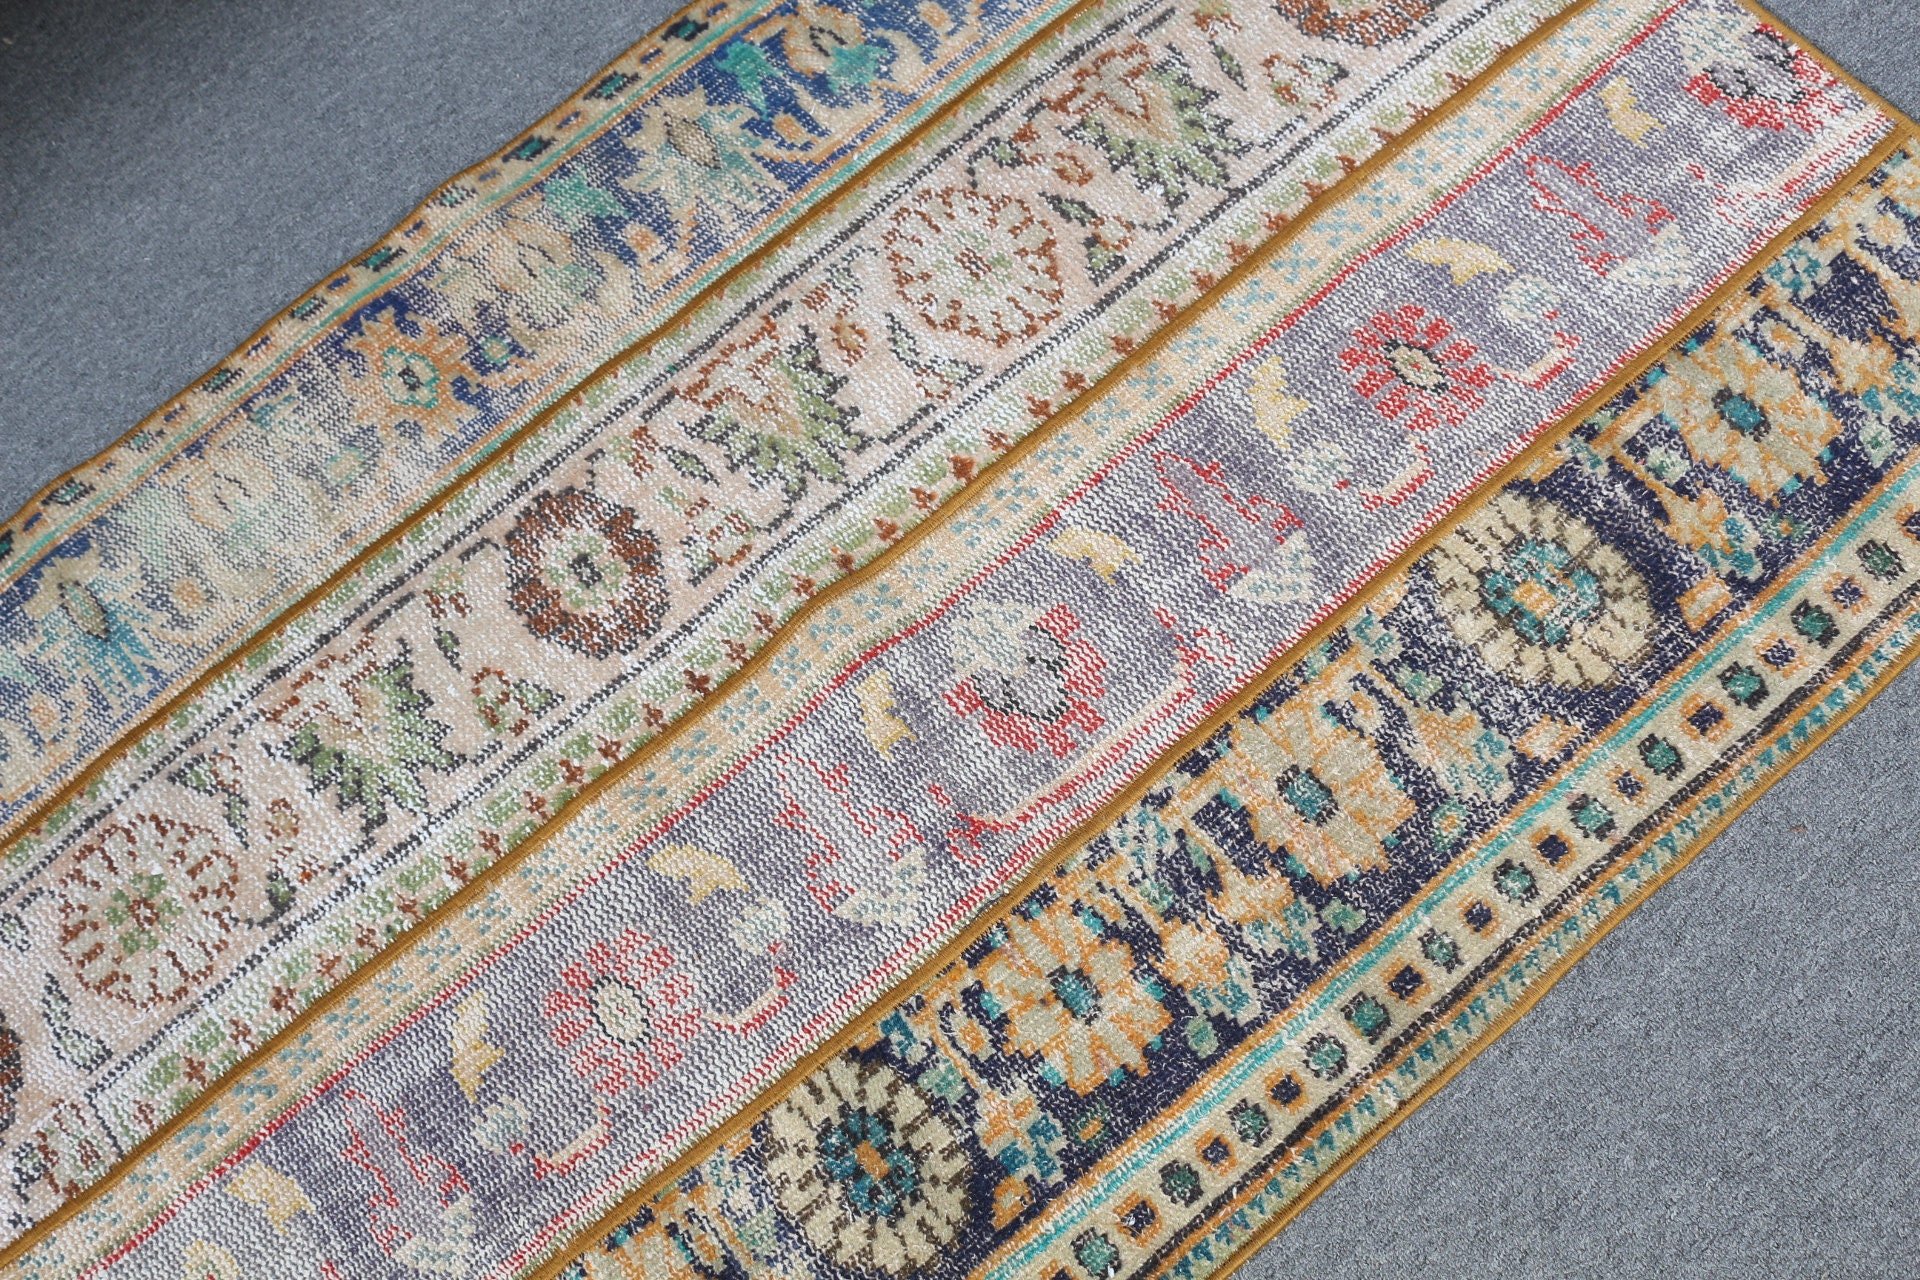 Kitchen Rugs, Rugs for Entry, 2.9x4.6 ft Small Rugs, Wool Rug, Entry Rug, Beige Cool Rug, Vintage Rug, Old Rugs, Antique Rugs, Turkish Rugs